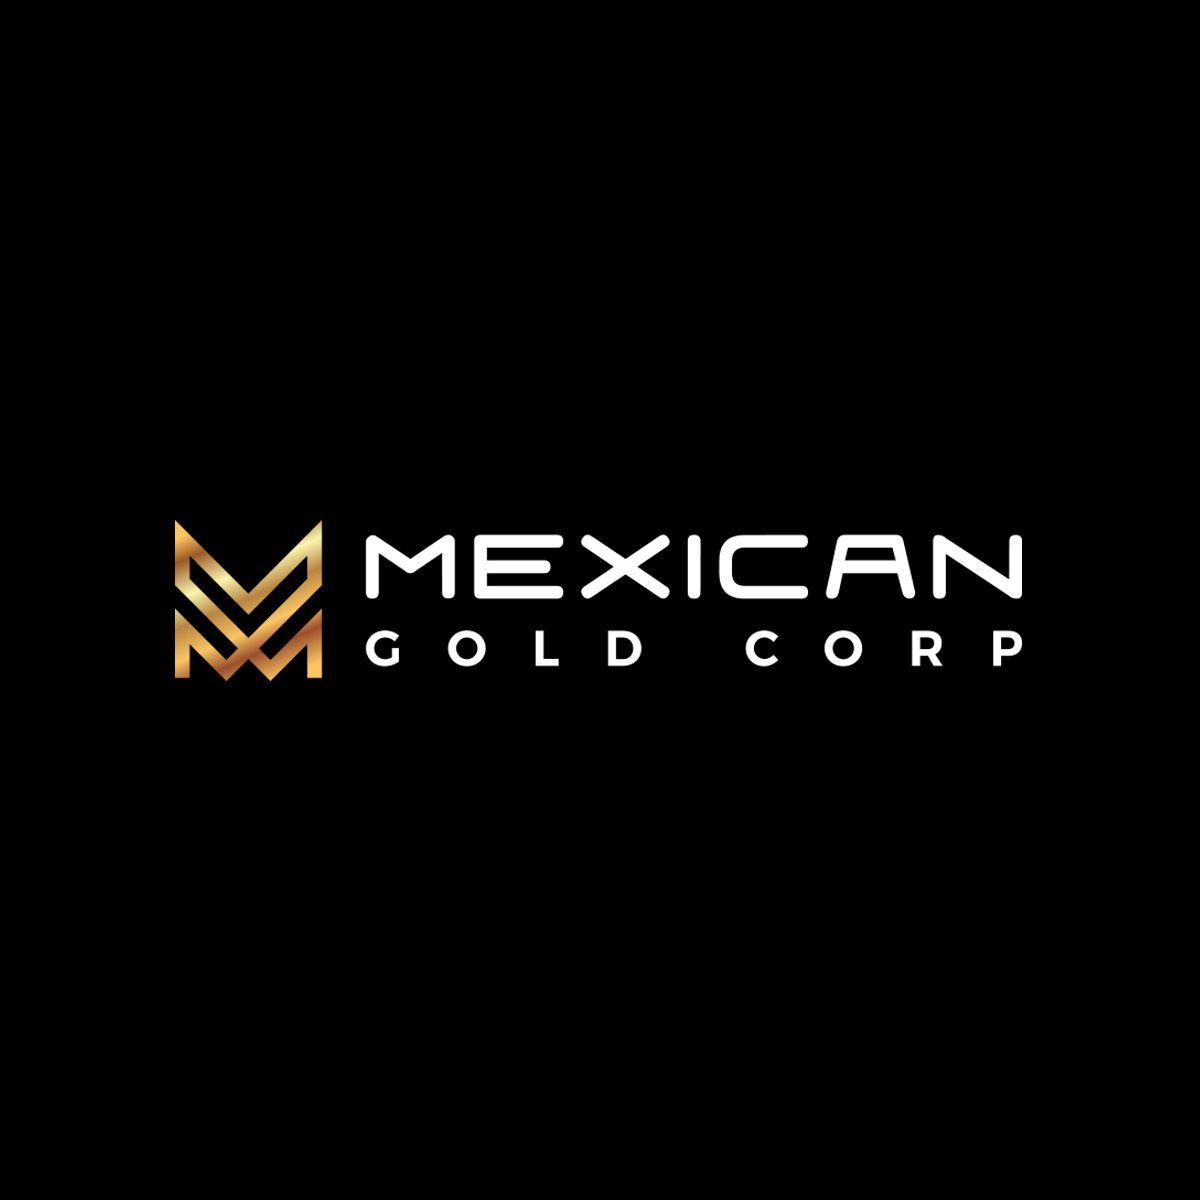 Goldcorp Logo - Mexican Gold Corp.